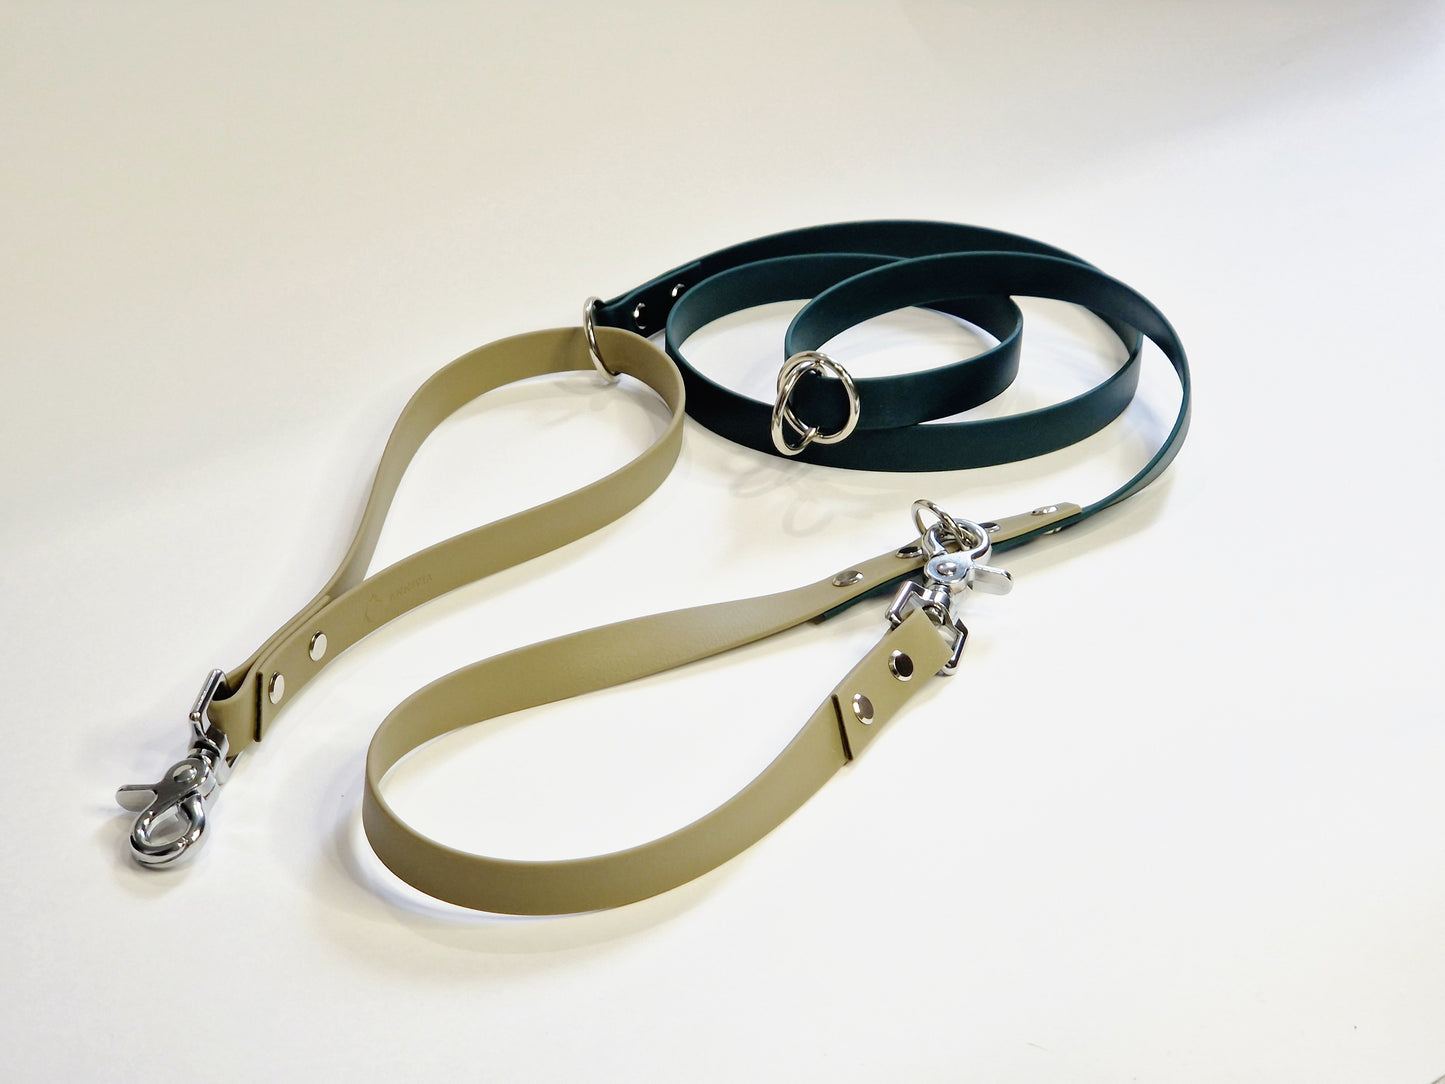 Powder Tan and Dark Green Biothane Multifunctional Dog Leash with Silver Carabiners, thoughtfully arranged for display.